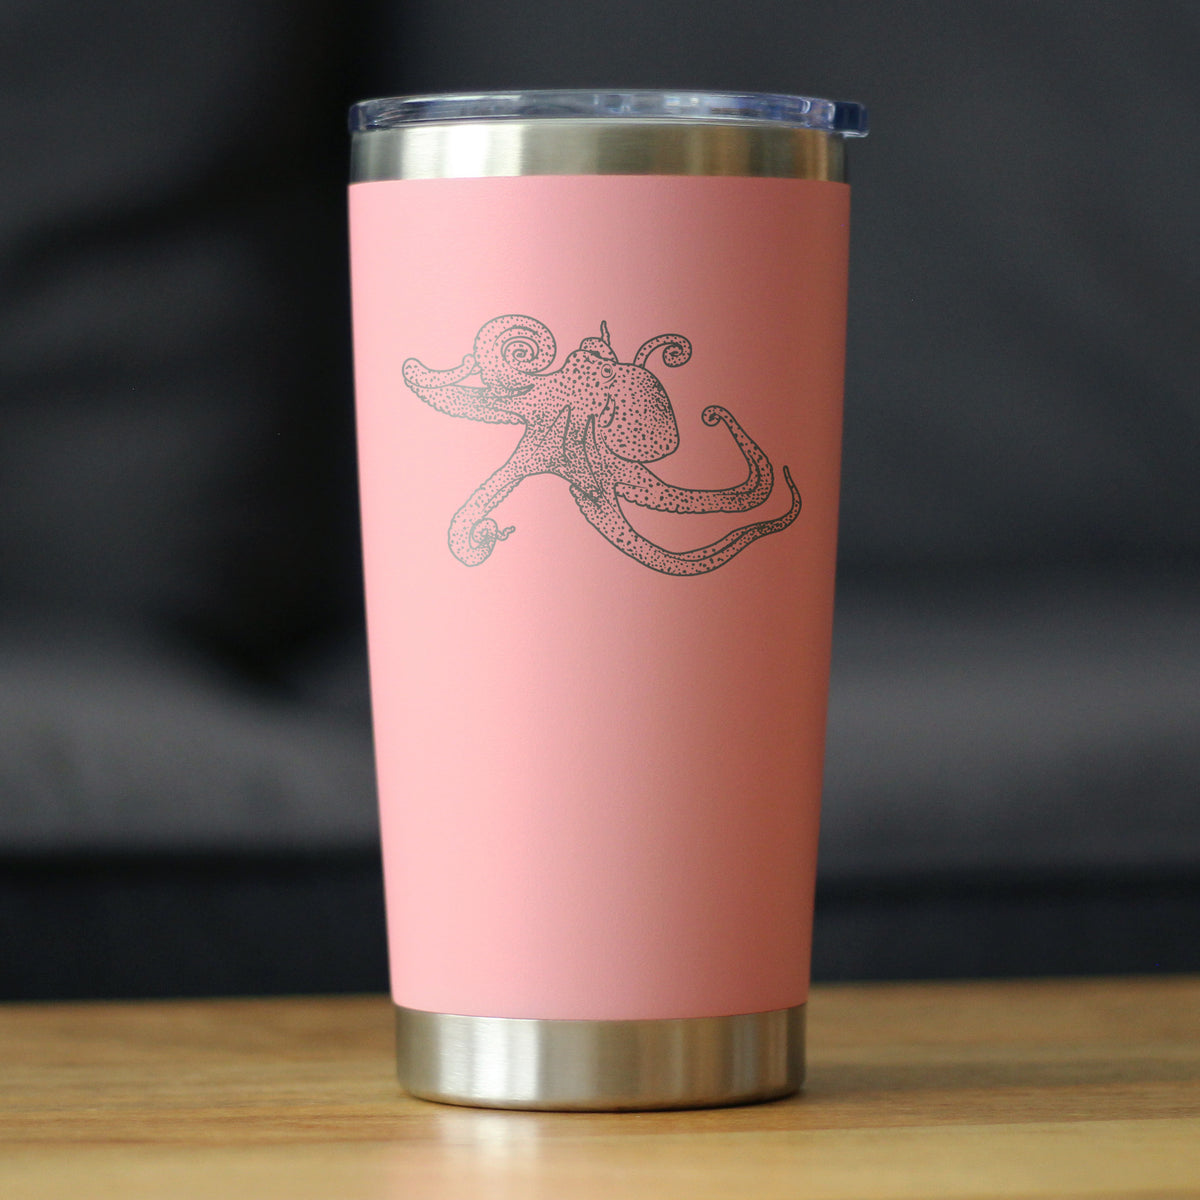 Octopus - Insulated Coffee Tumbler Cup with Sliding Lid - Stainless Steel Travel Mug - Ocean Gifts and Decor for Women and Men